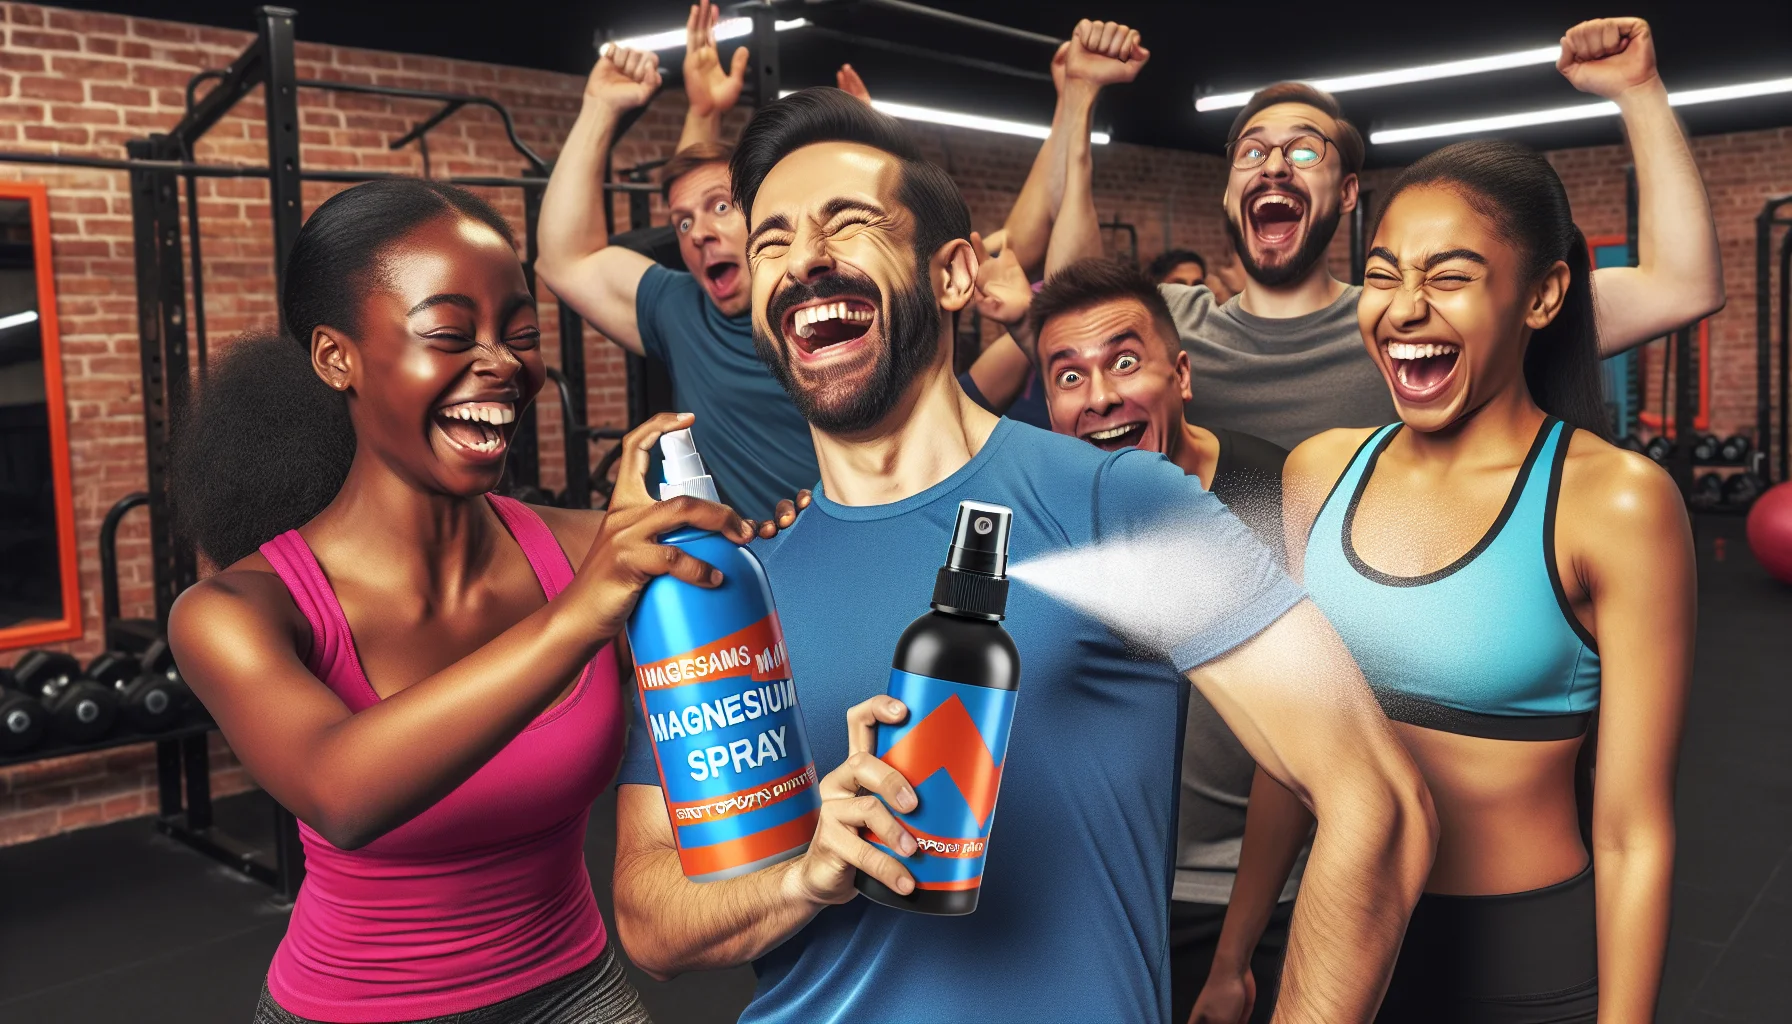 Create a humorous scene in a sports atmosphere where a friendly and jovial male gym trainer of Hispanic descent and a black female athlete are both laughing while using magnesium spray for their armpits. The magnesium spray bottle is vibrantly colored and stands out prominently. The reaction of other gym-goers around them varies from surprise to amusement. One part of the image should include a witty statement encouraging individuals to try out sports supplements. The gym environment should exude energy and camaraderie, making the use of magnesium spray seem like a fun and essential part of their routine.